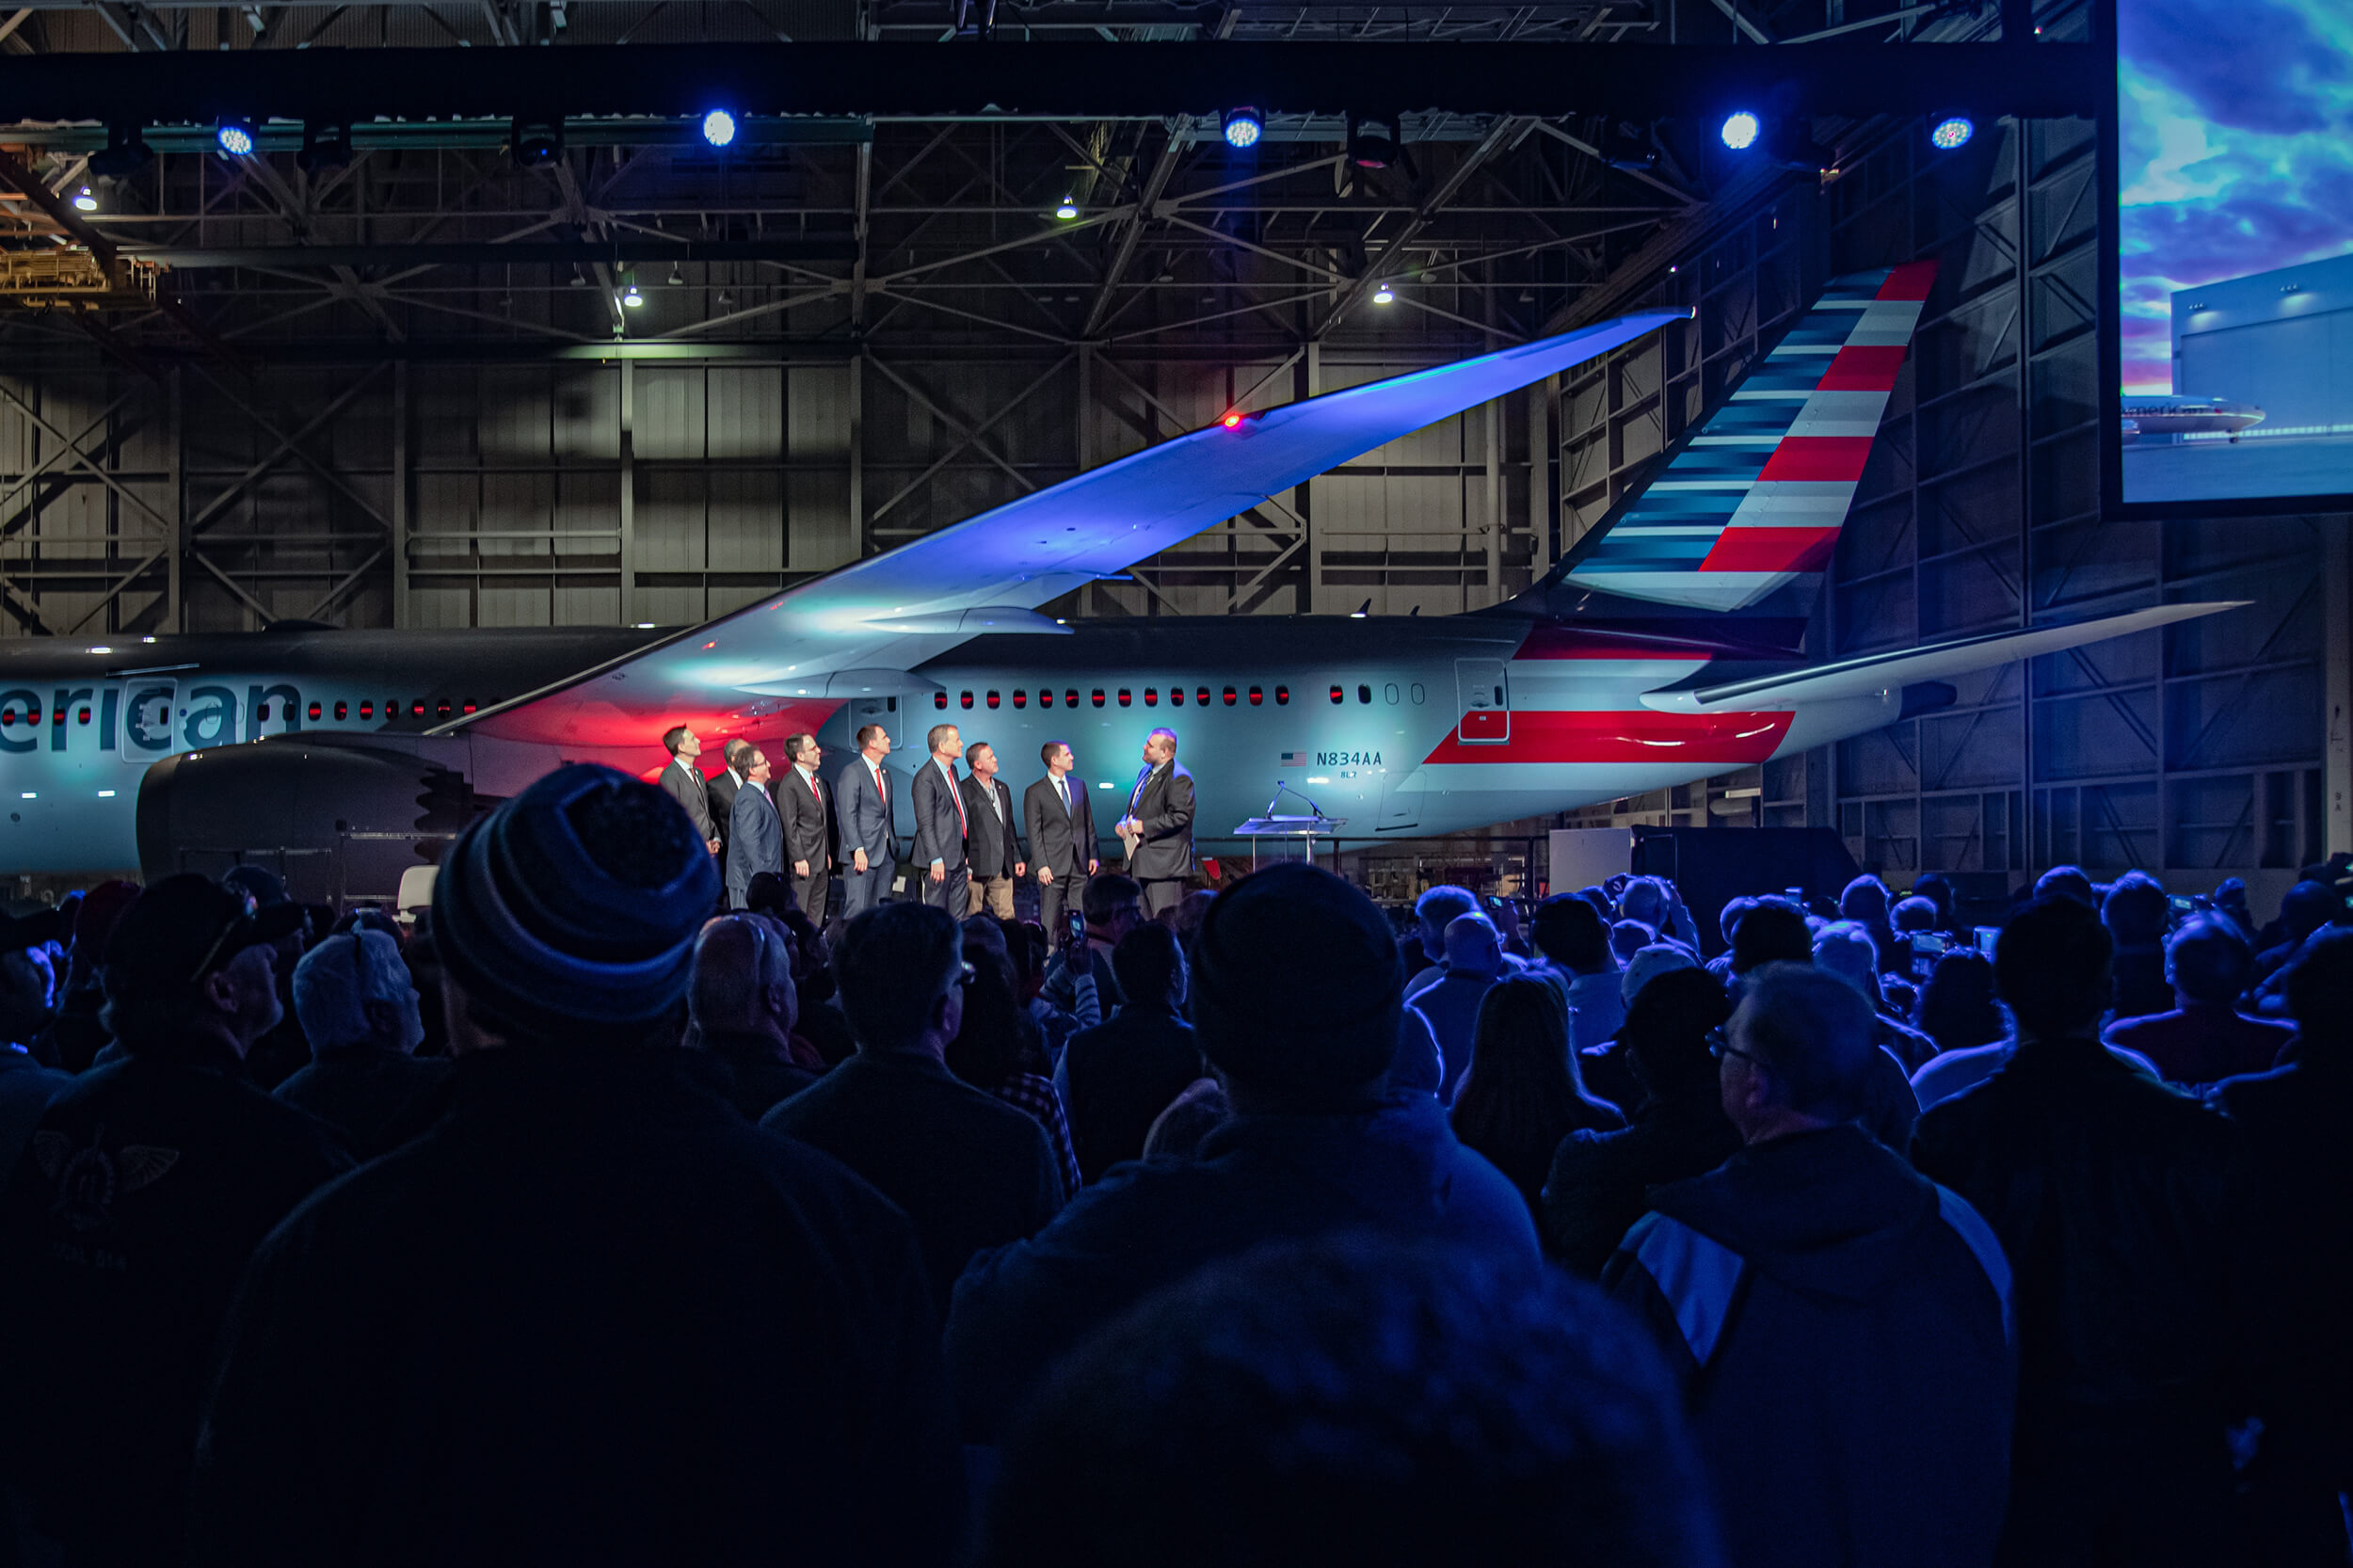 Tulsa businessmen stand in front of an American Airlines airplane during a ceremony.